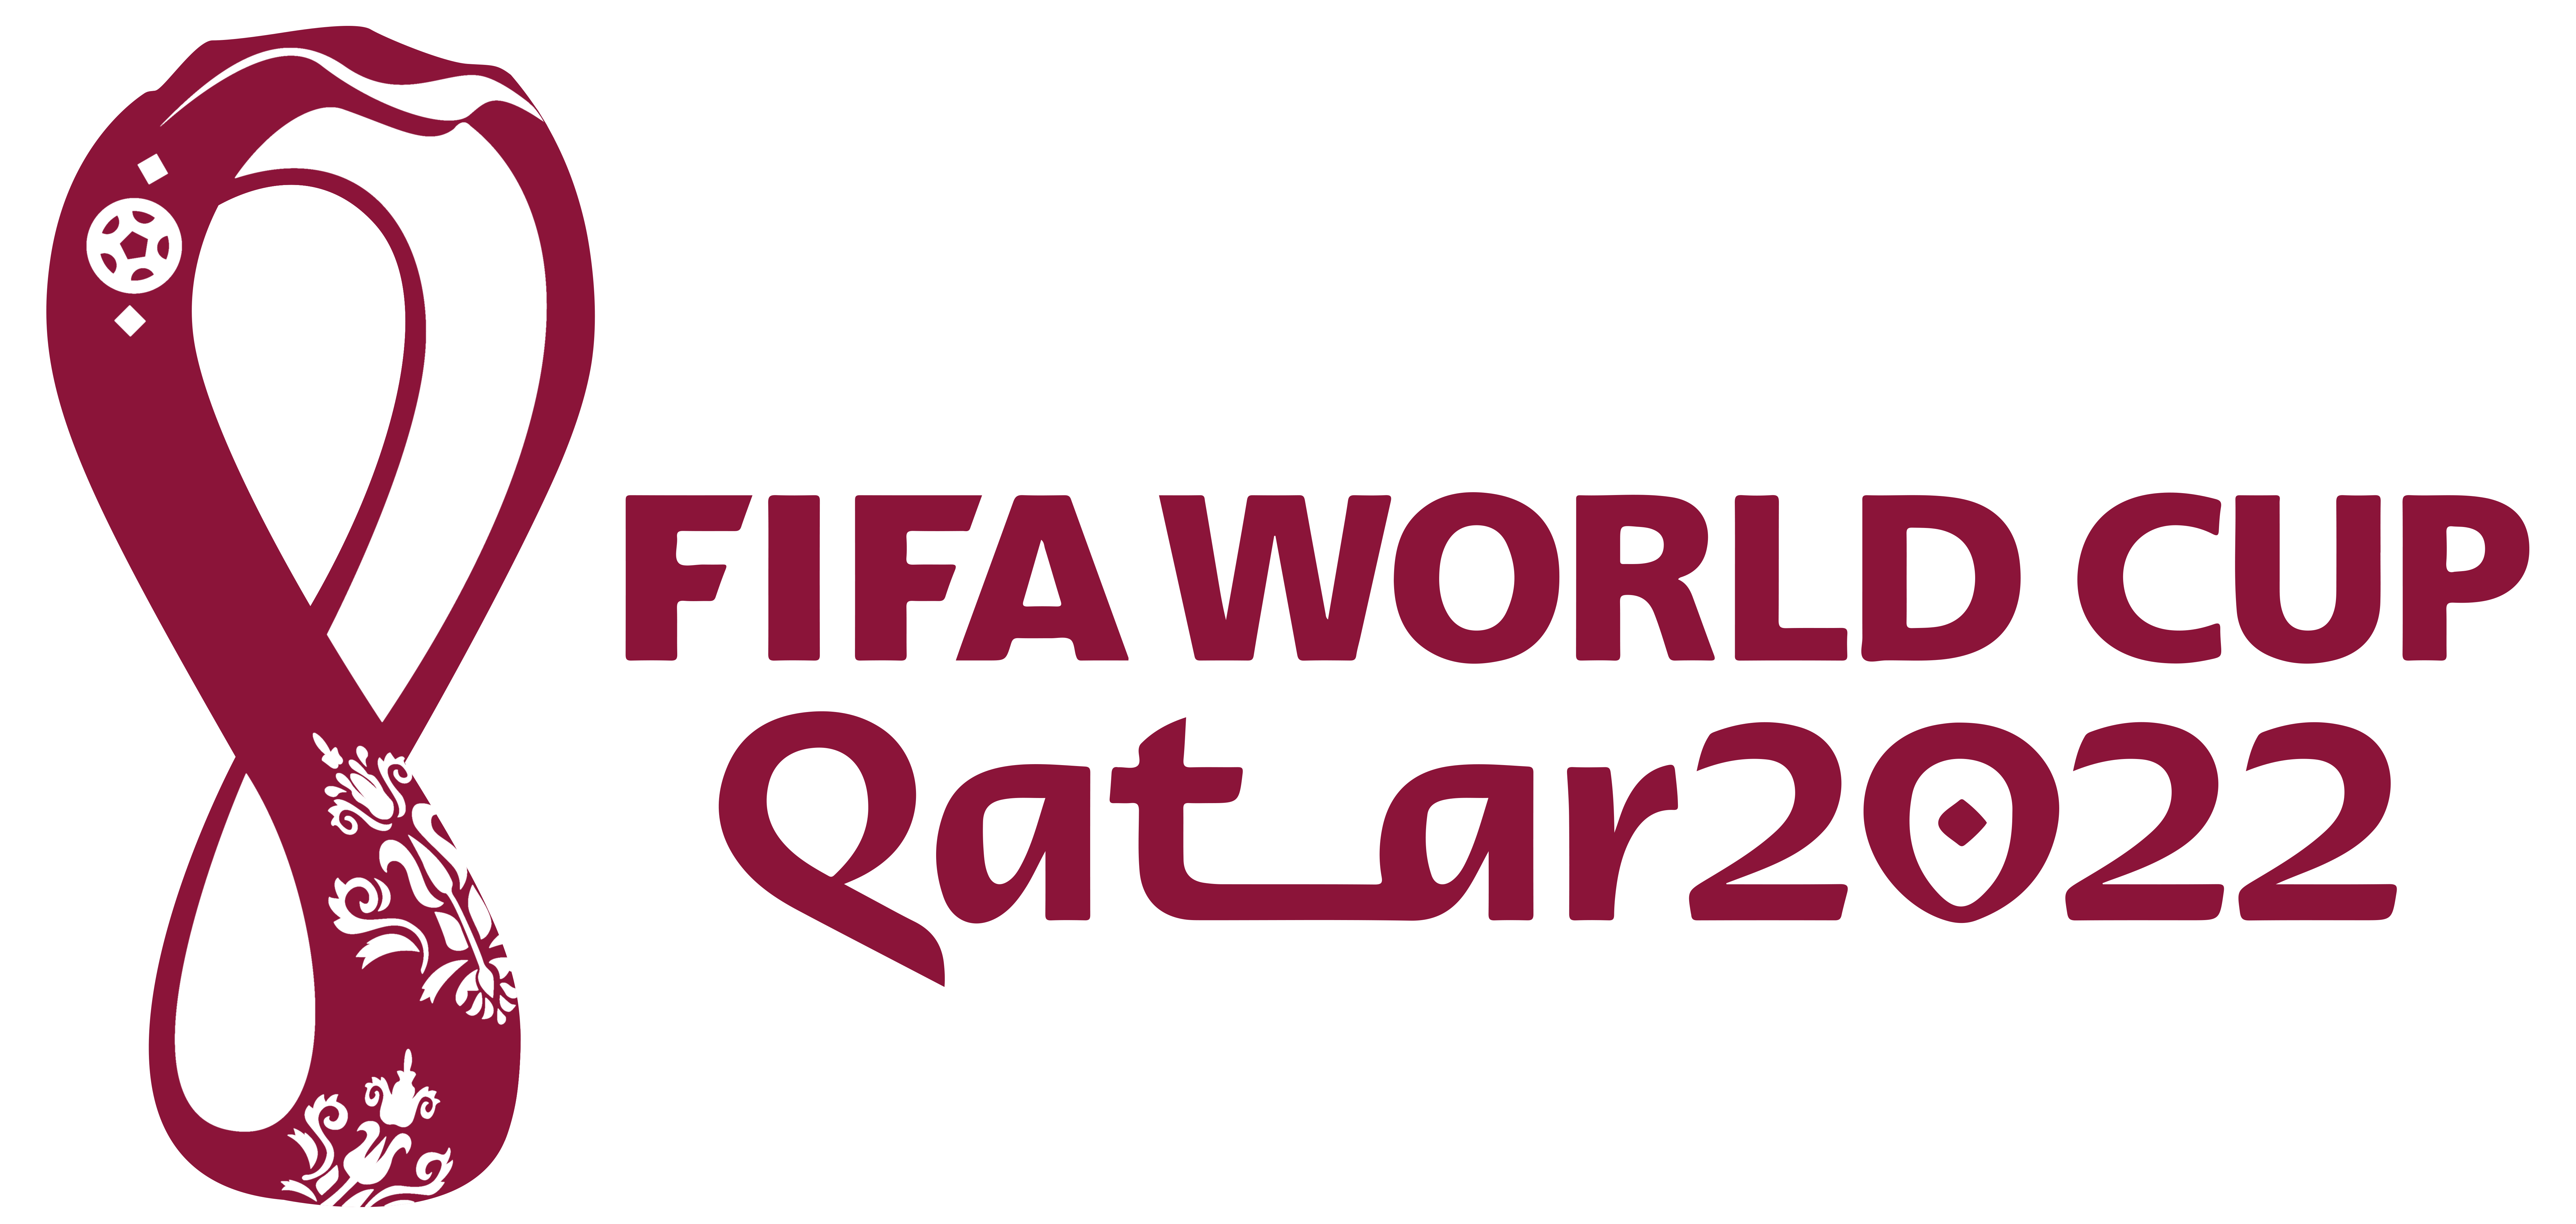 World-Cup-Qatar-2022-FIFA-Red-Logo-PNG-Transparent-Image​  Gallery  Yopriceville - High-Quality Free Images and Transparent PNG Clipart